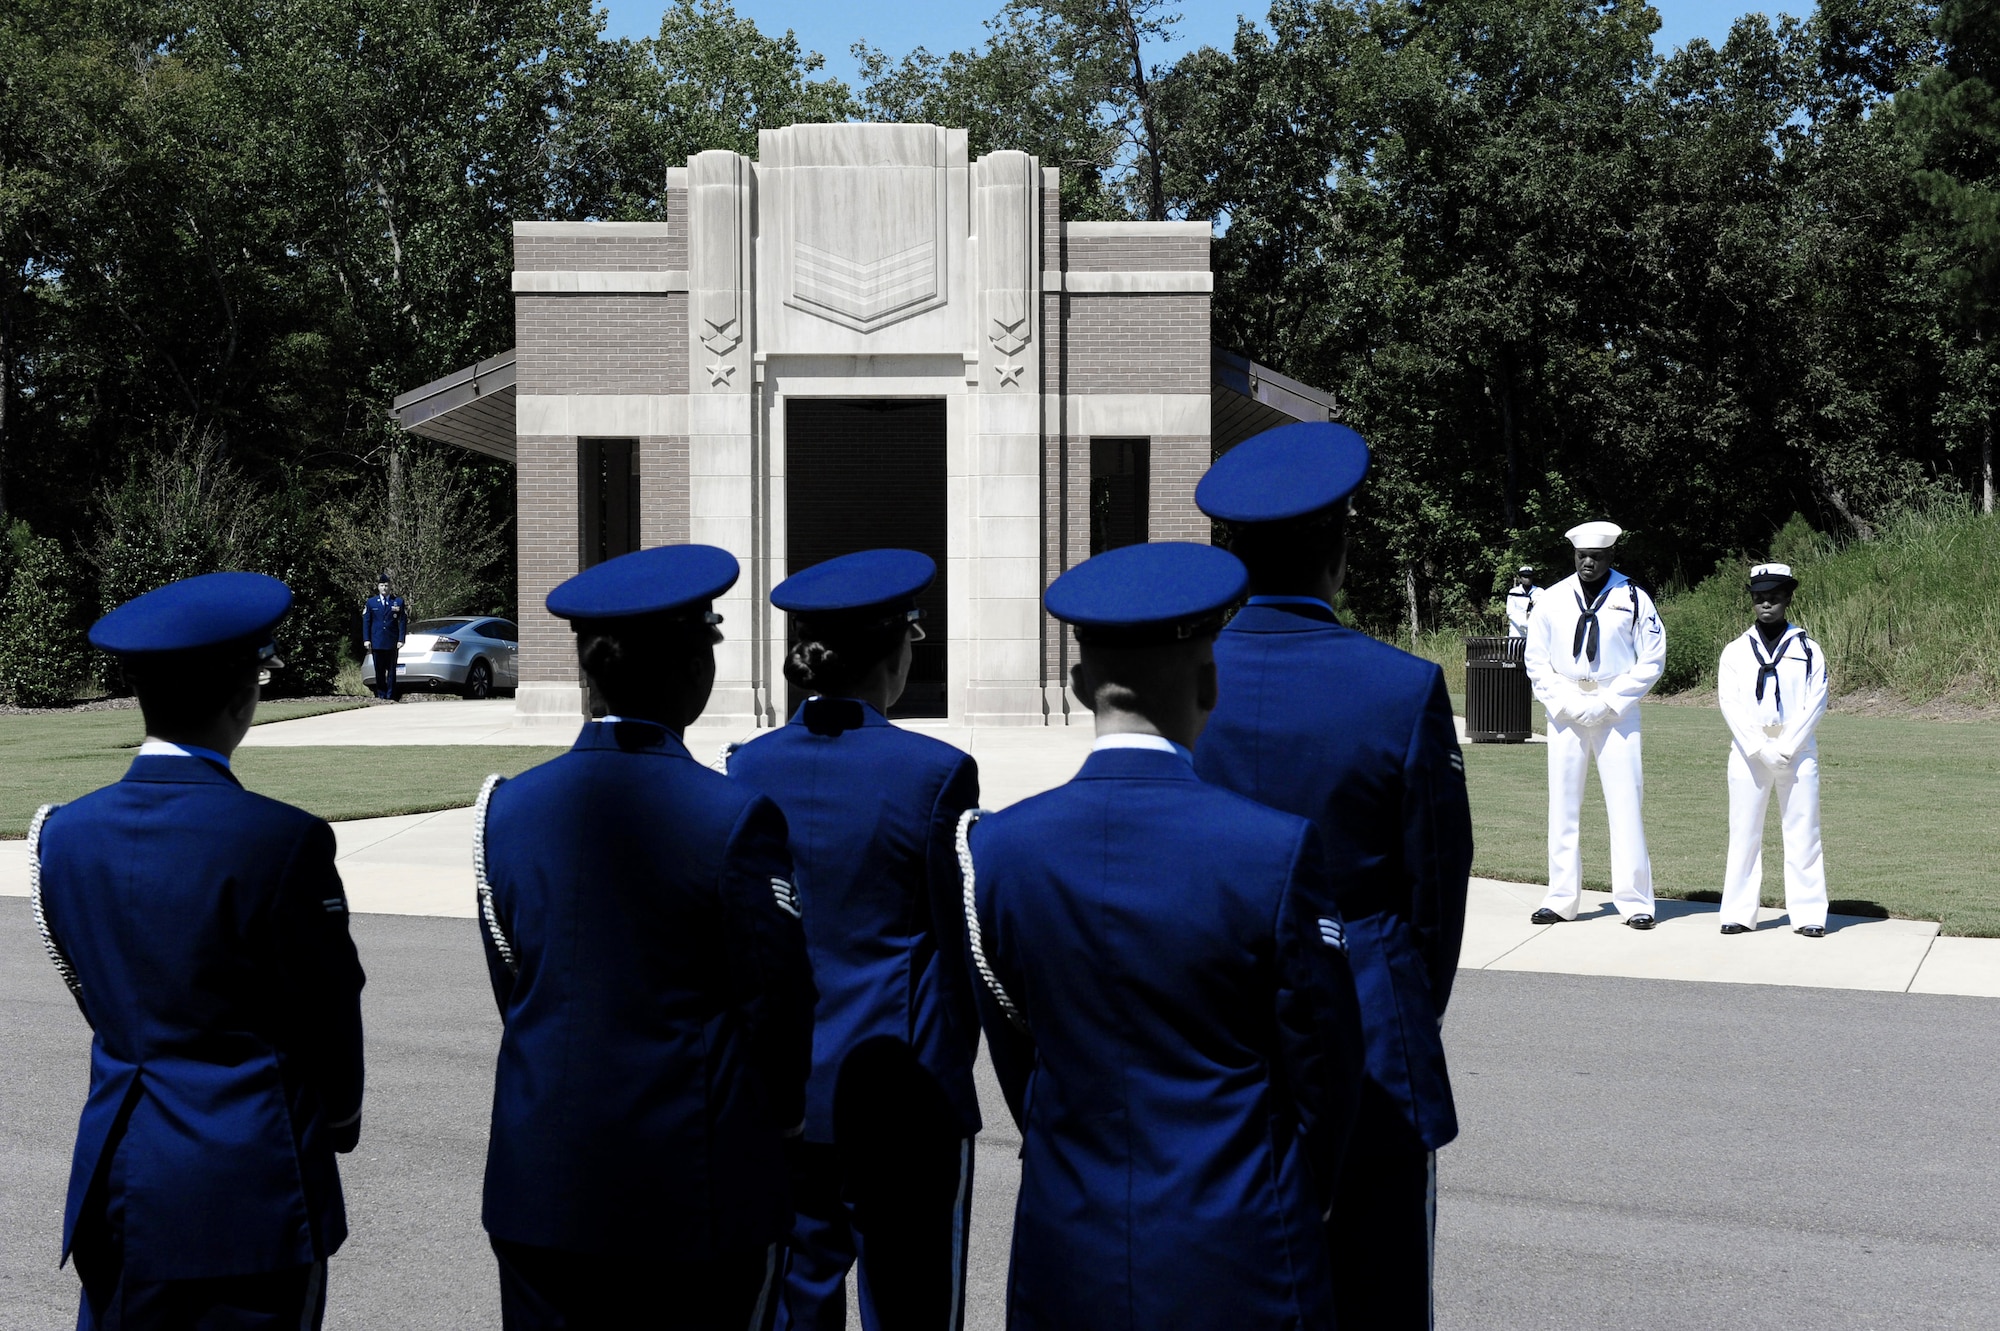 Members of the Maxwell Air Force Base Honor Guard and Navy Honor members are followed by members of the  family during a memorial ceremony held Aug. 22, 2012 at the Alabama National Cemetary in Montevallo Ala. Although Mr. was U.S. Naval veteran, Honor Guard Airmen participate in joint service funerals around the globe. (U.S. Air Force photo illustration by Master Sgt. Michael Voss)